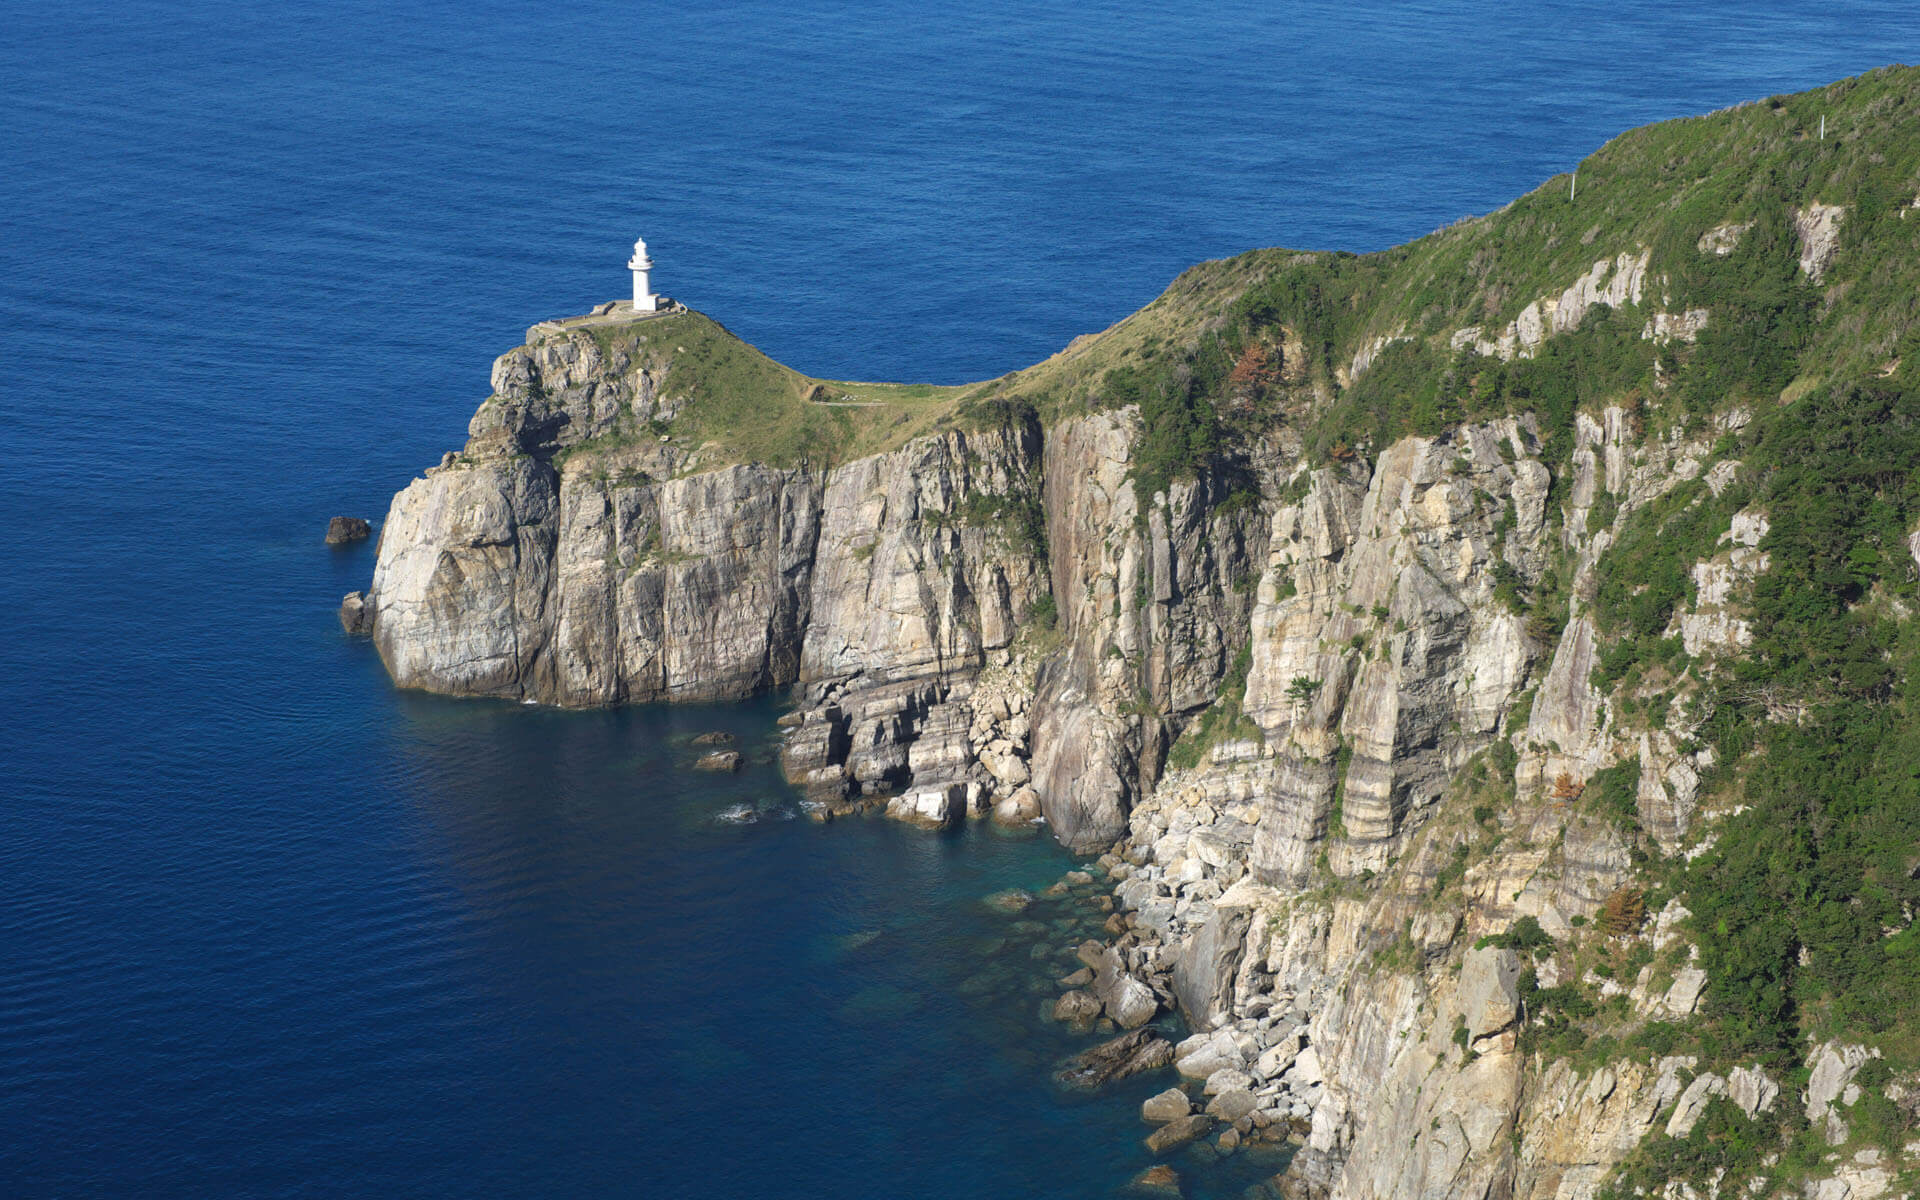 Full Day Combo Cape Point and Winelands Tour